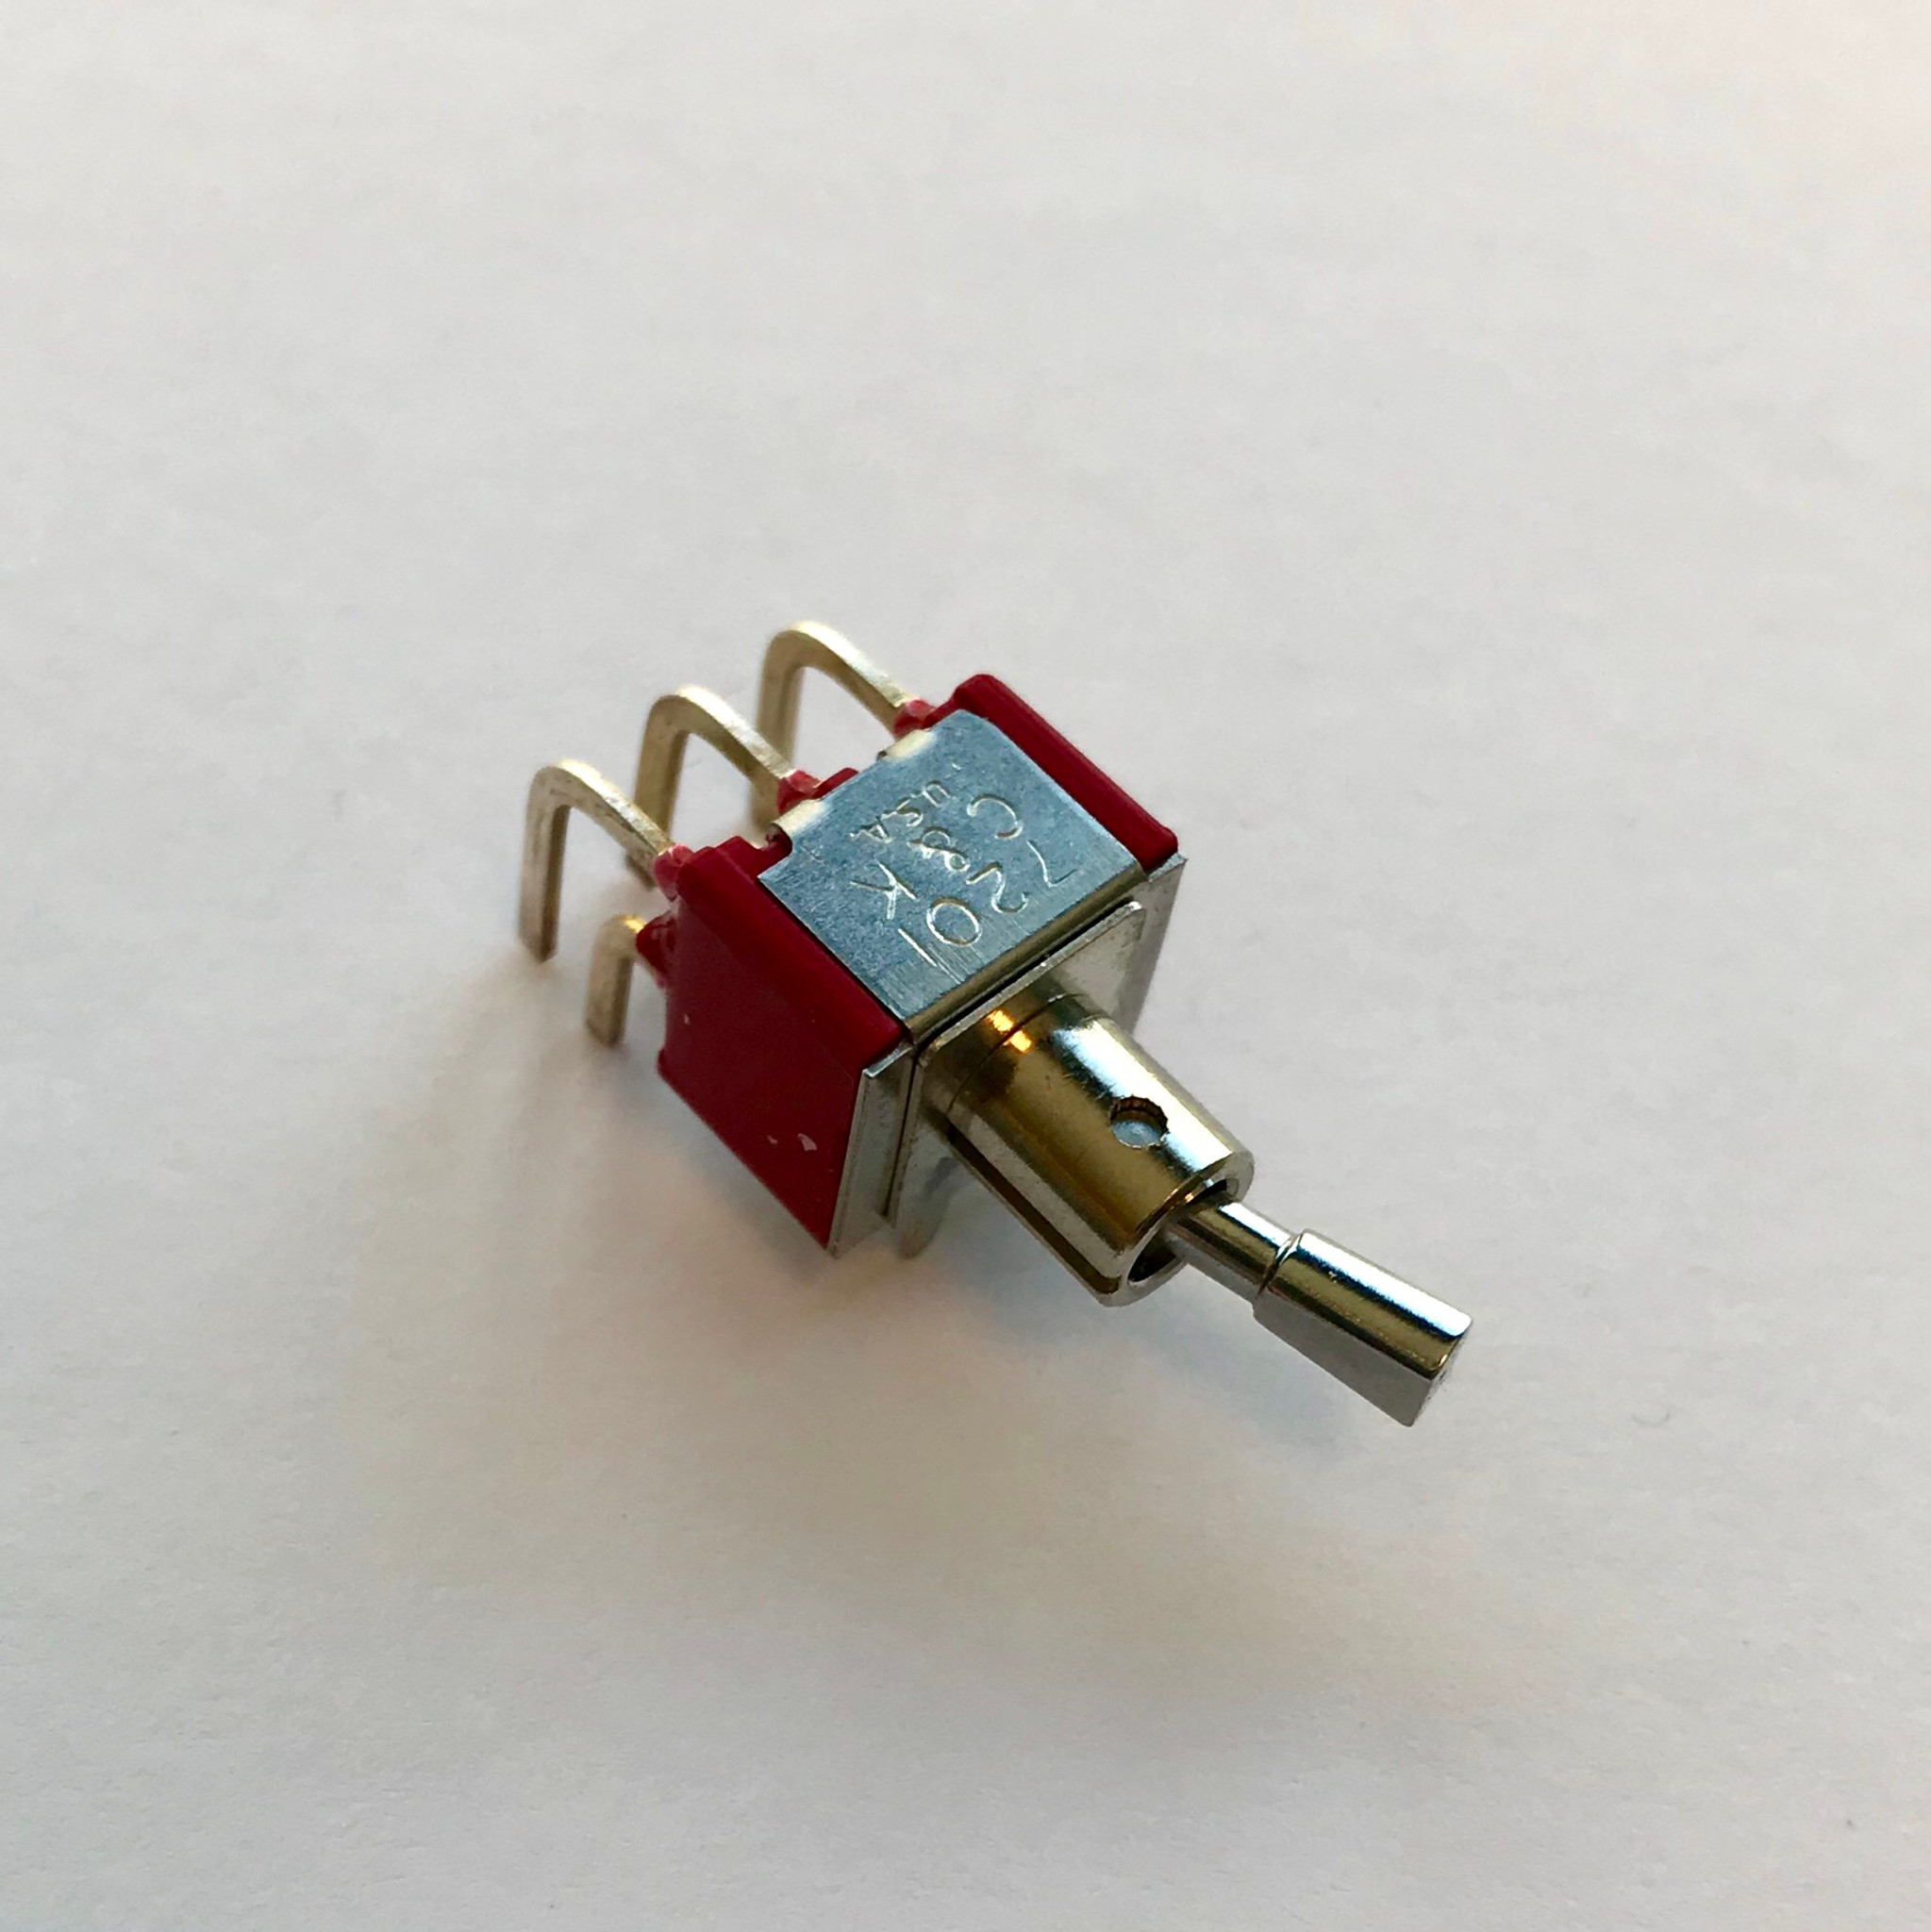 Long Dolly  Miniature Toggle Switch DPDT C&K 7201 Hobby Model Railway UK CE06 